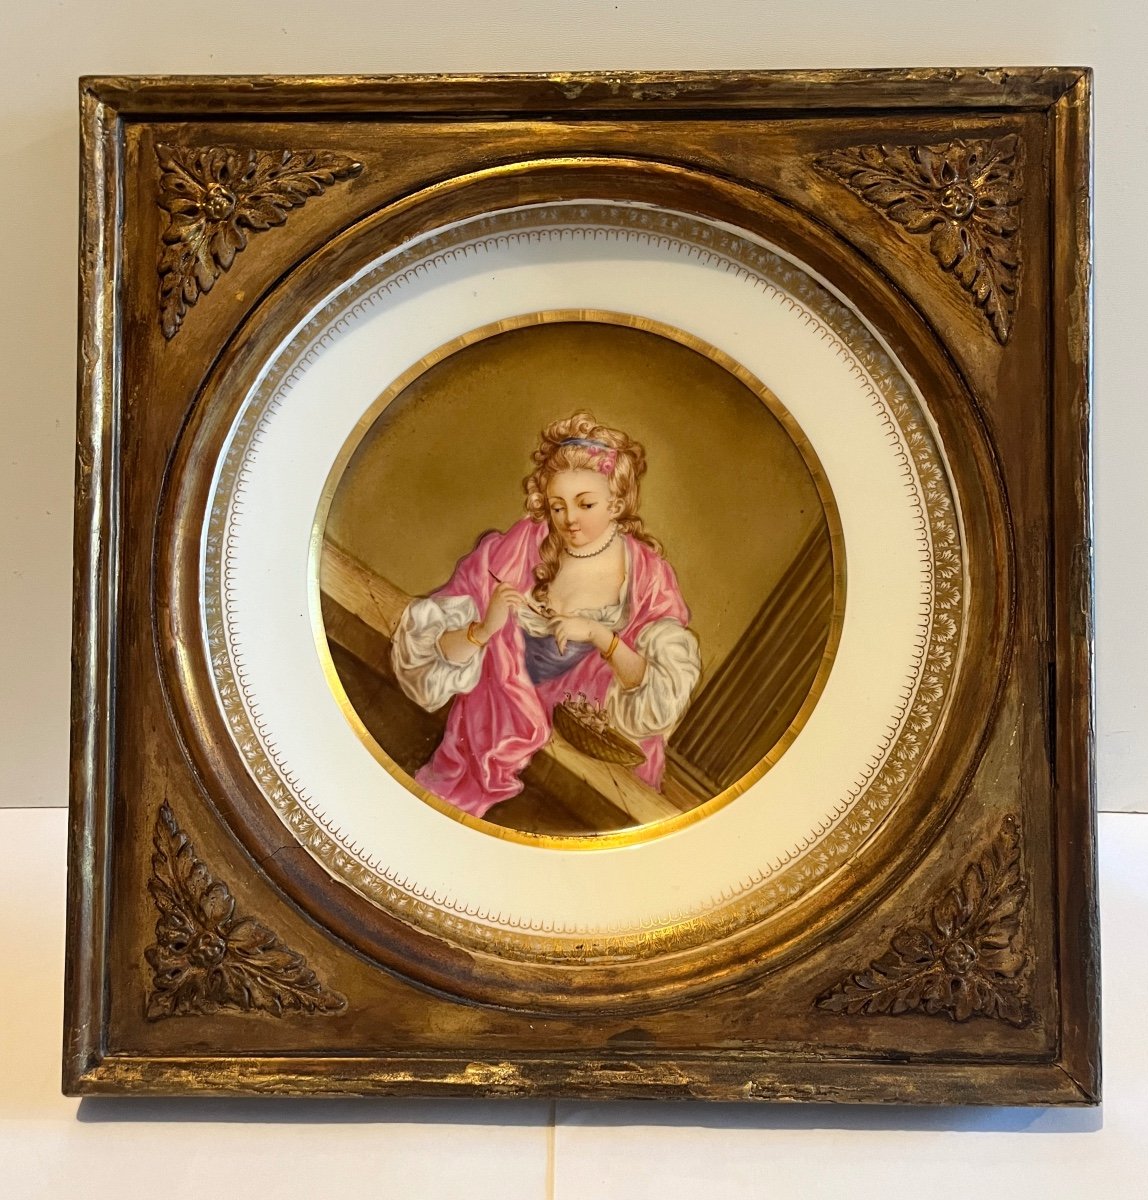 Sèvres Porcelain Plate 19th Century In A Golden Wood Frame